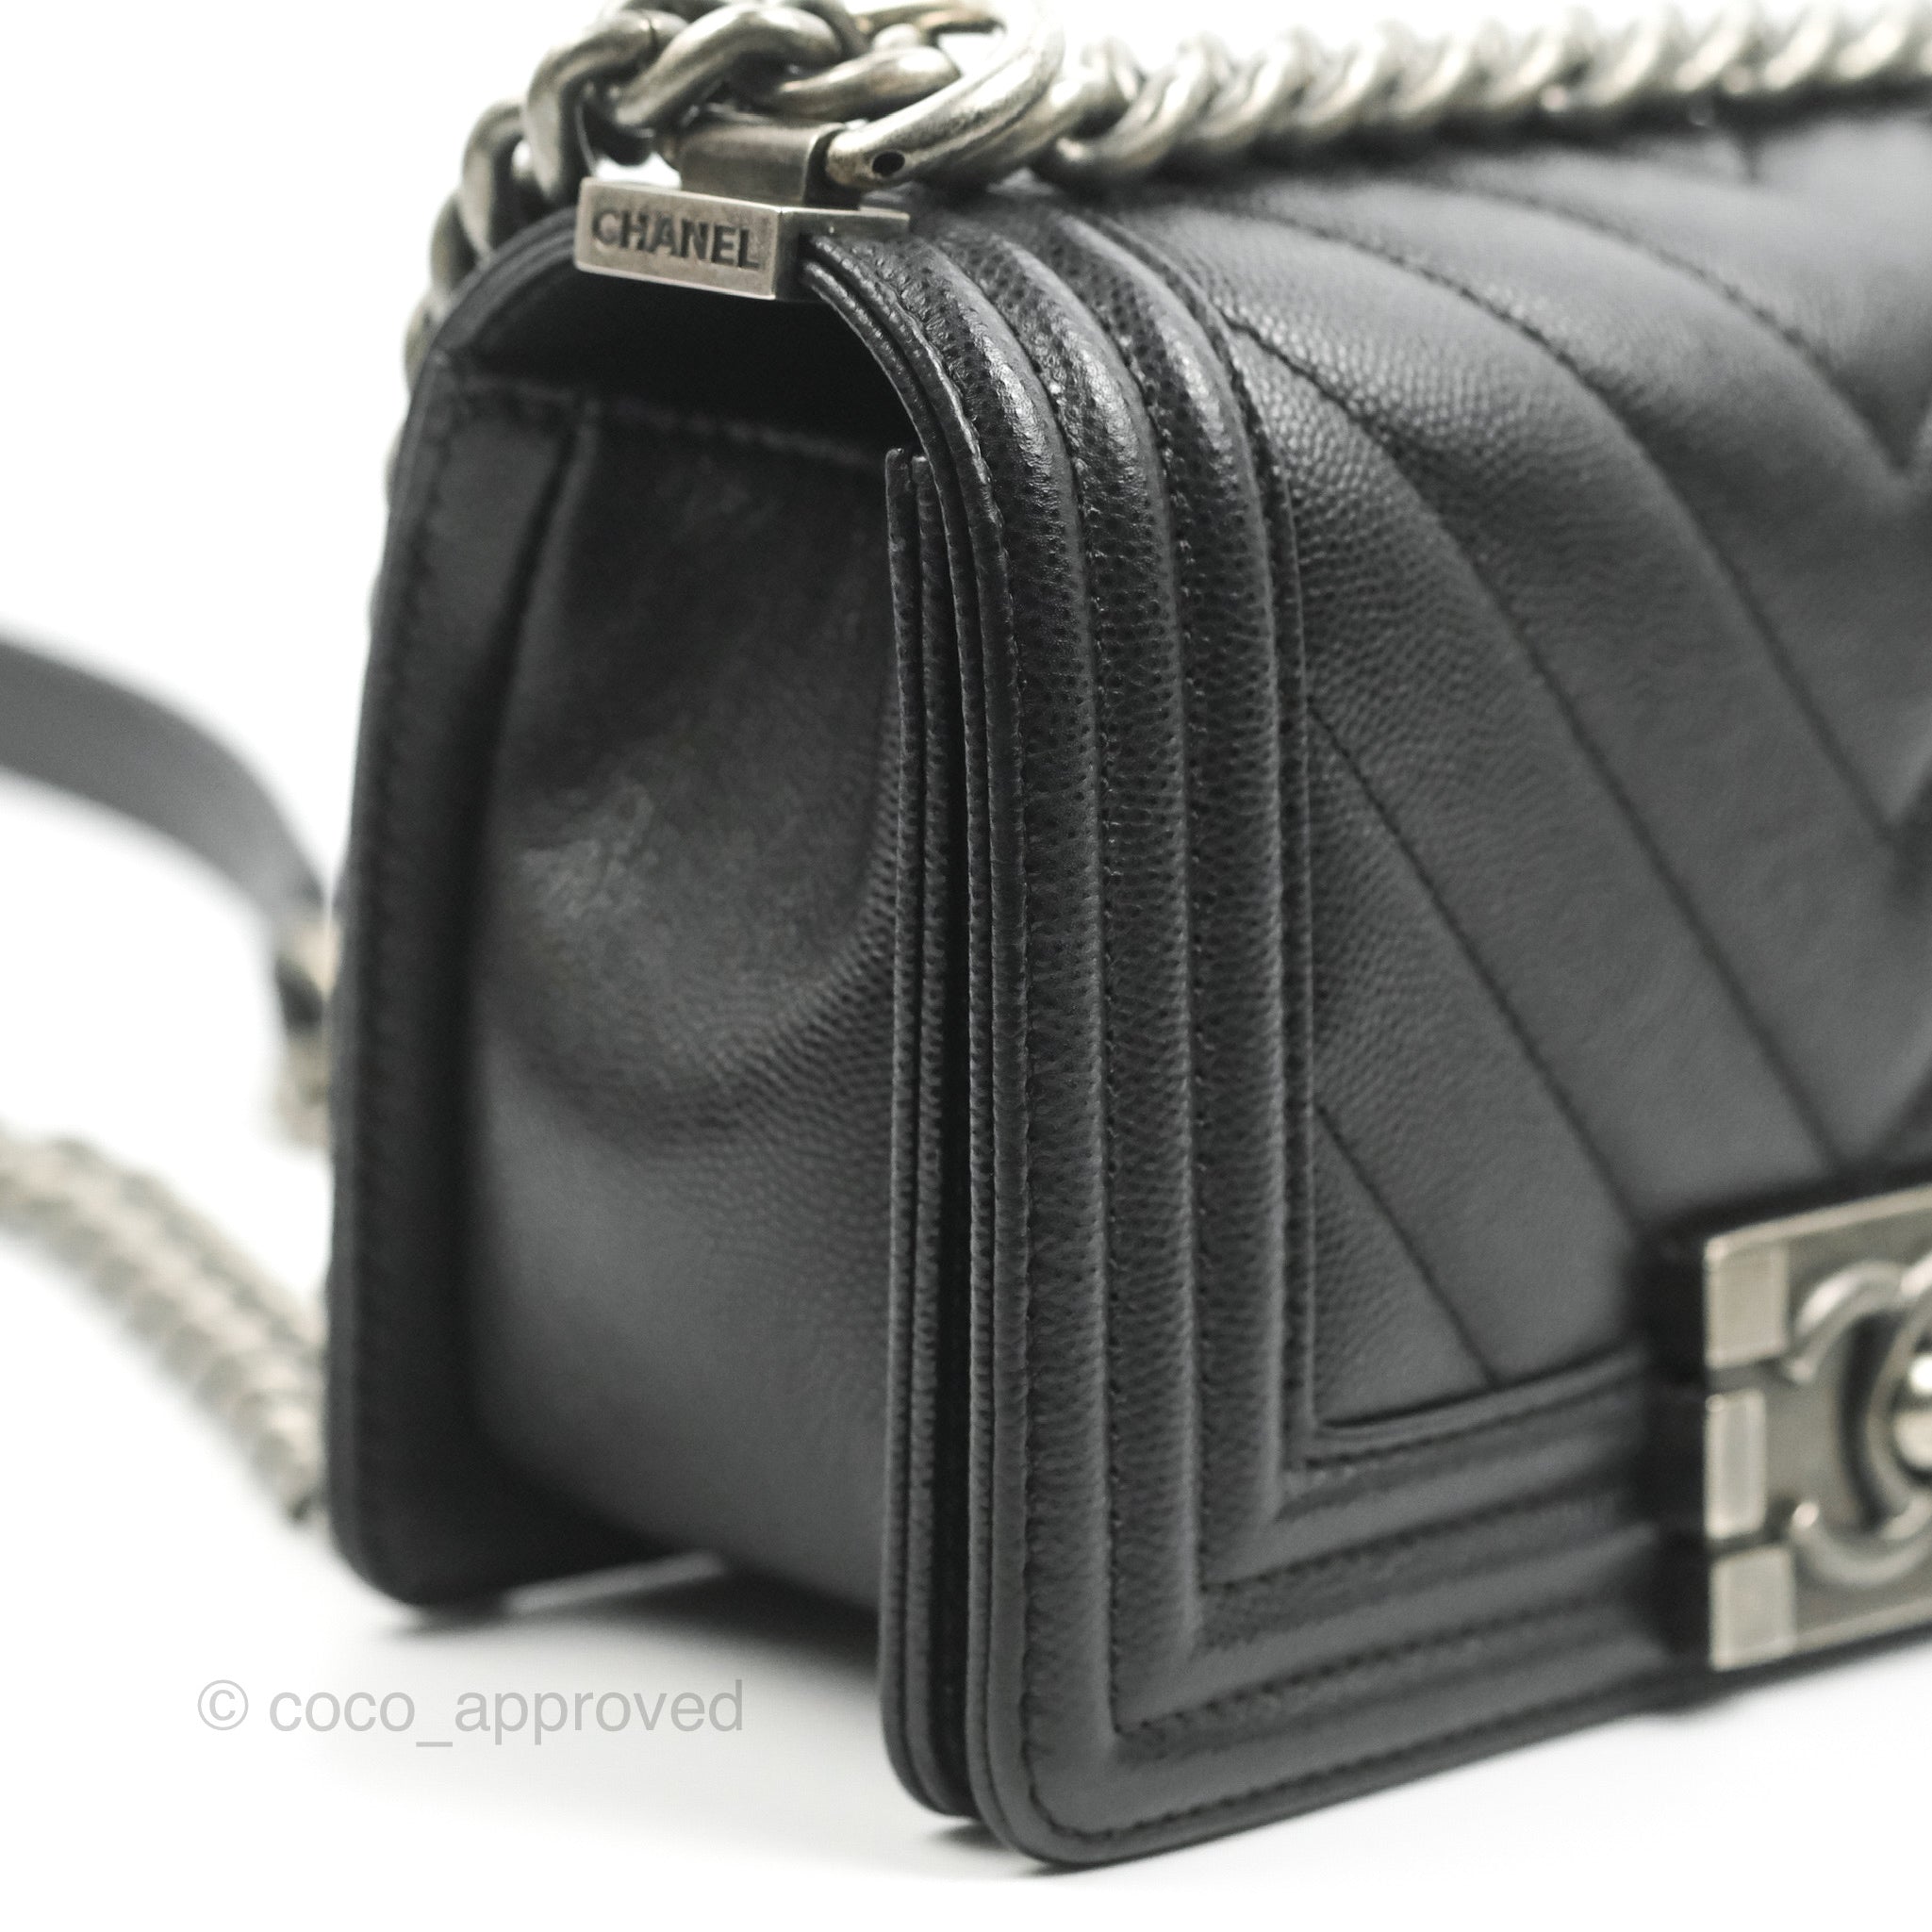 CHANEL CHANEL Boy Small Bags & Handbags for Women, Authenticity Guaranteed